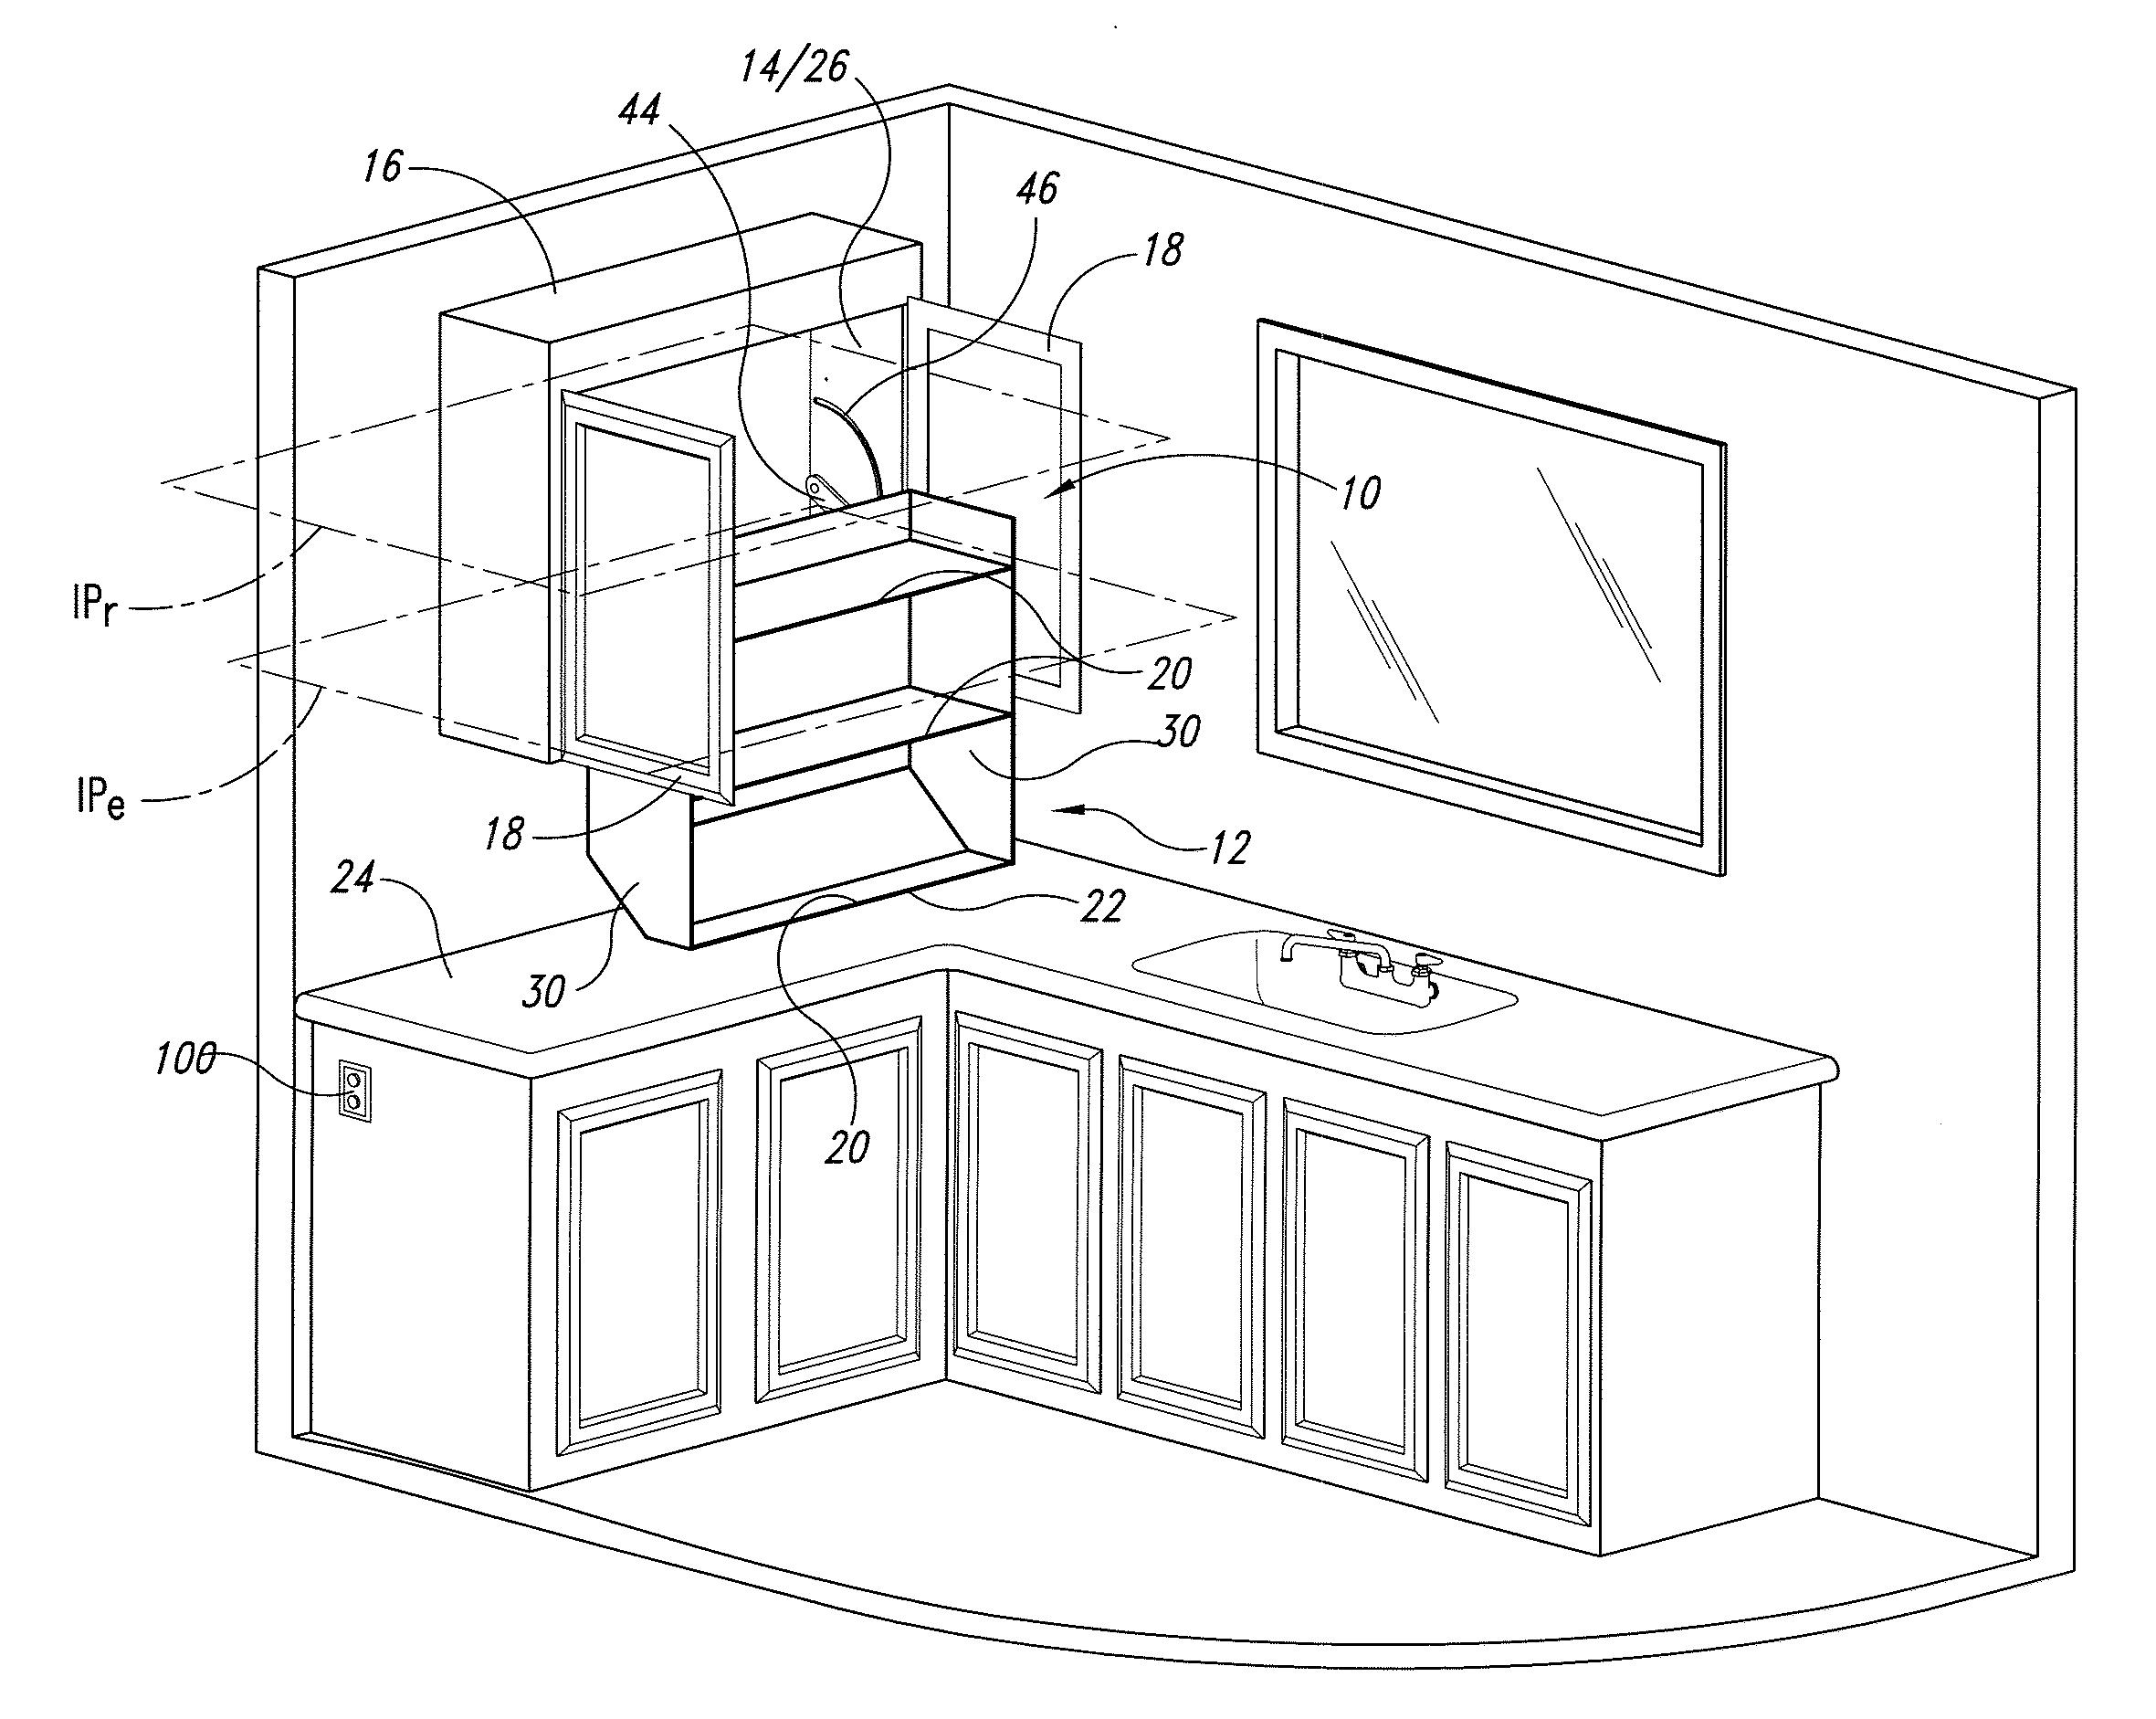 Motorized moveable shelf assembly for cabinet structures